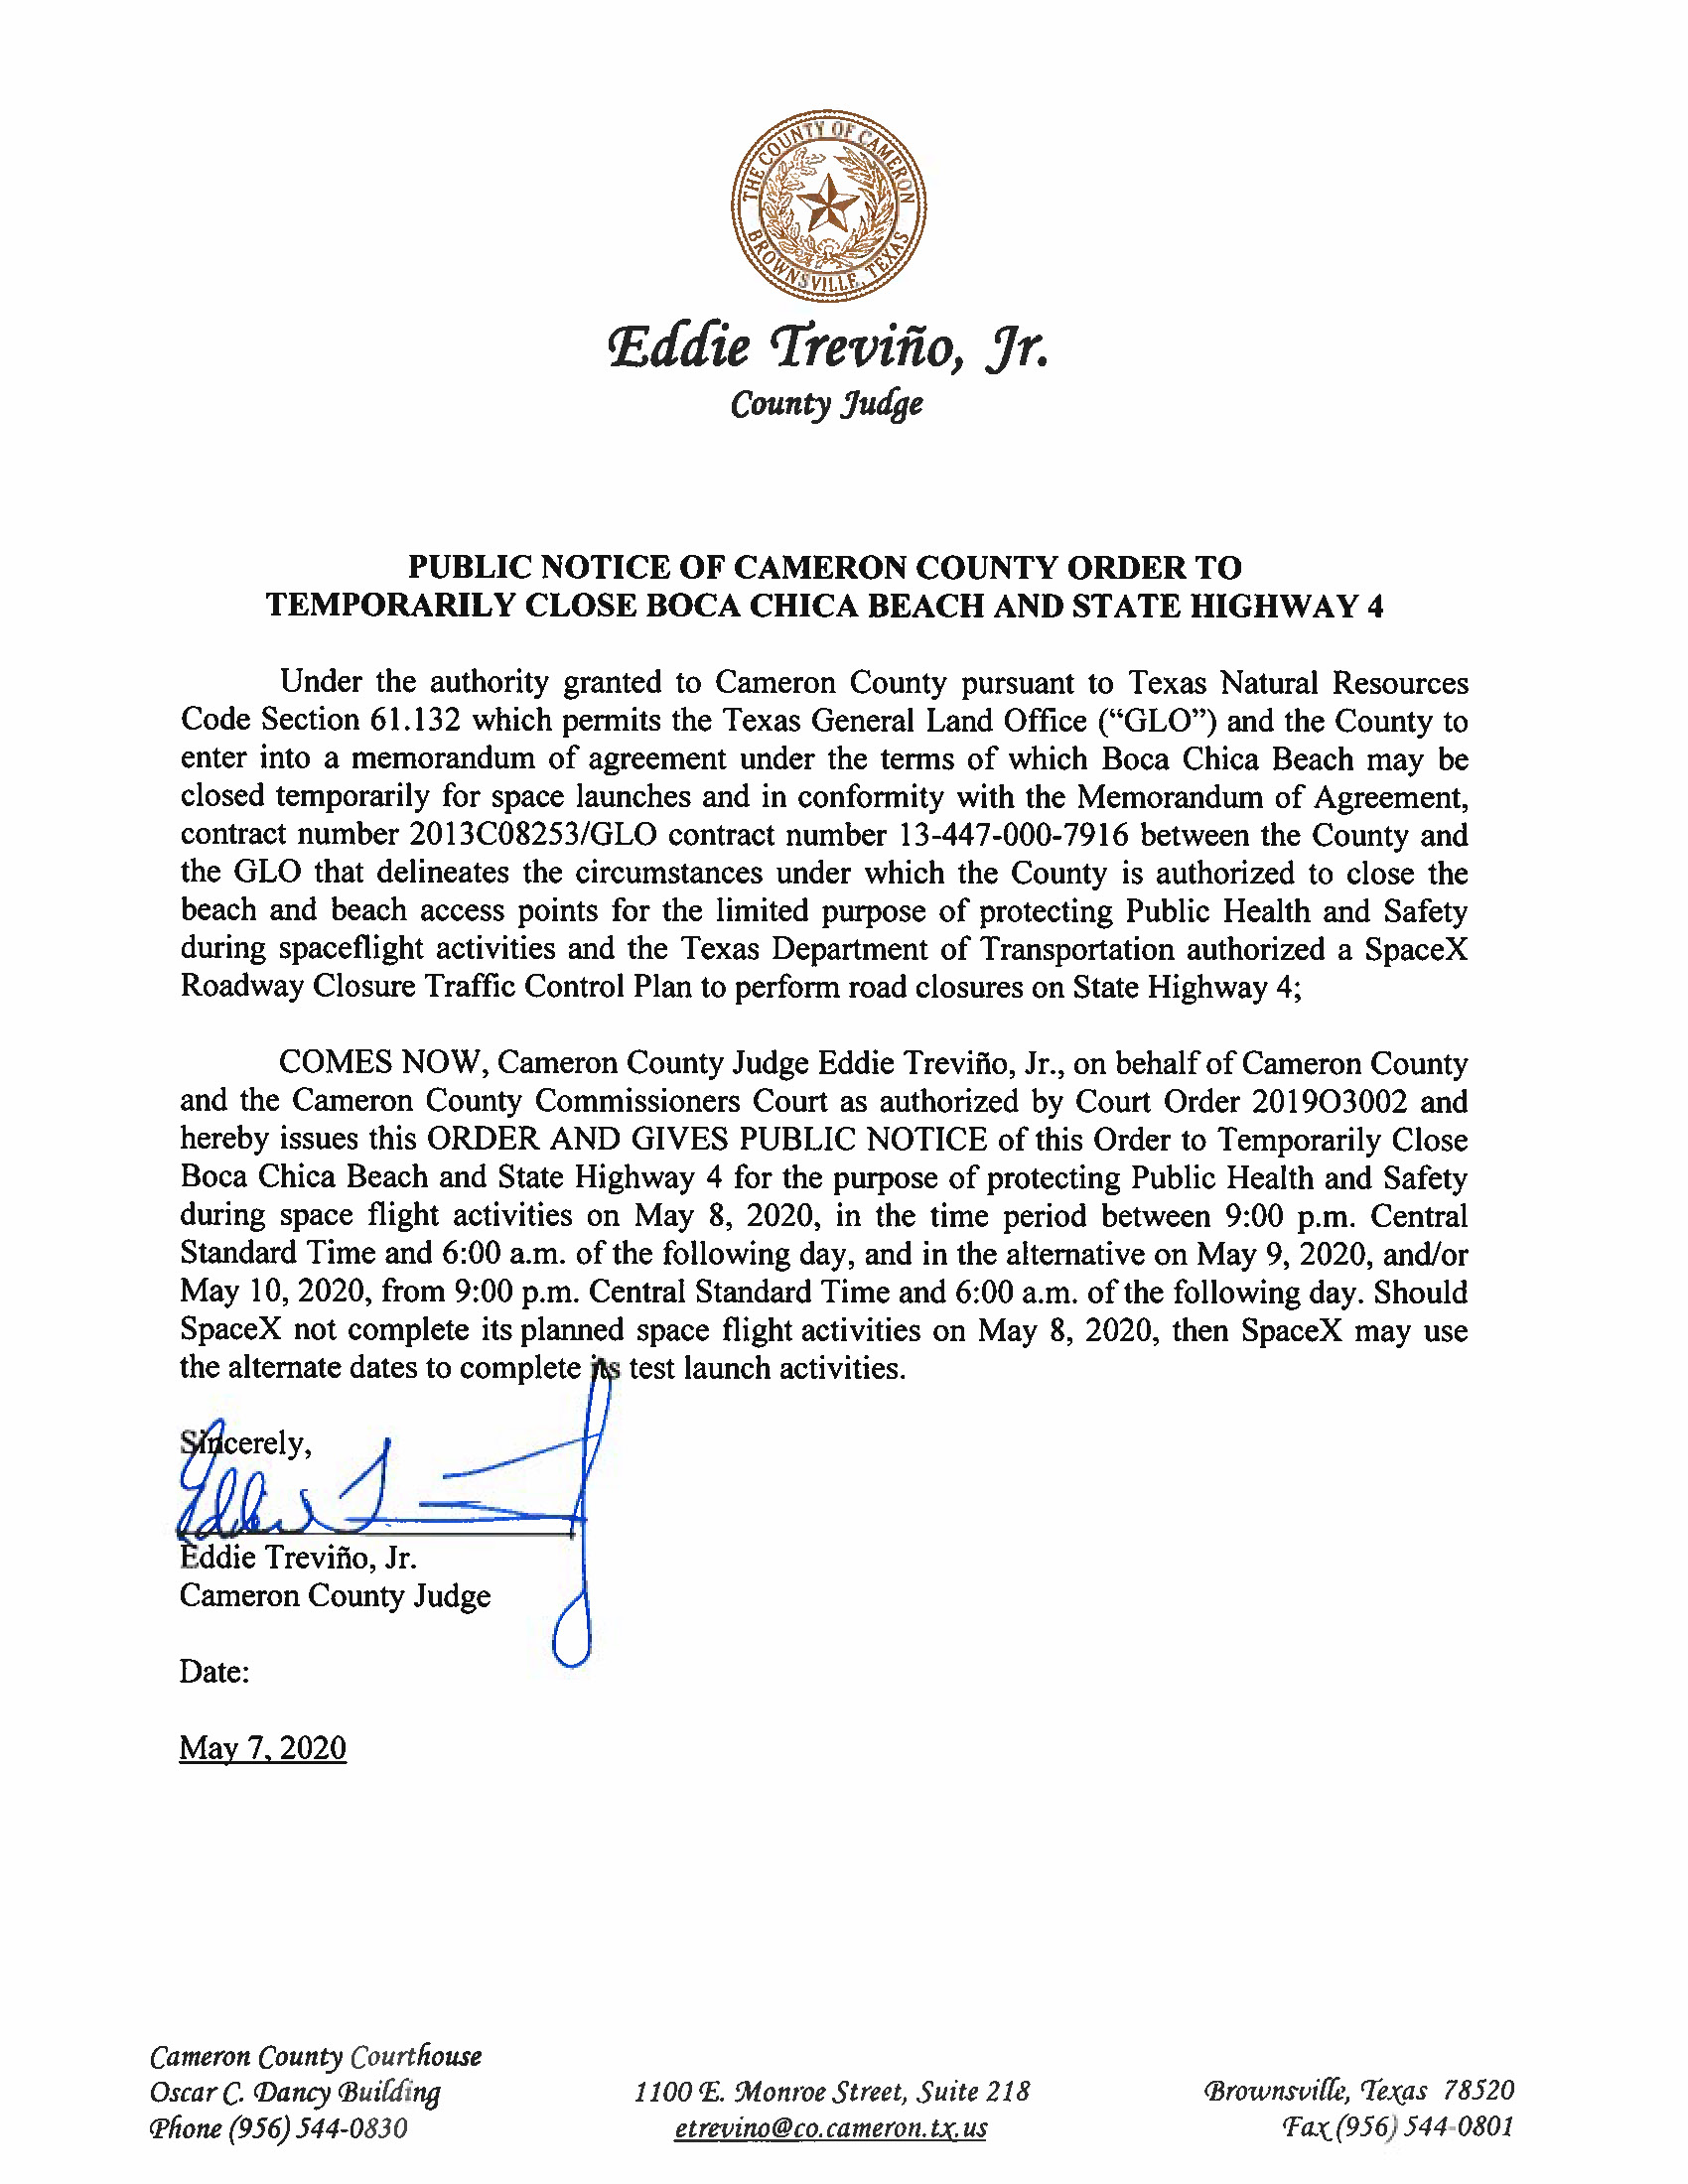 PUBLIC NOTICE OF CAMERON COUNTY ORDER TO TEMP. BEACH CLOSURE AND HWY. 05.08.20 Page 1